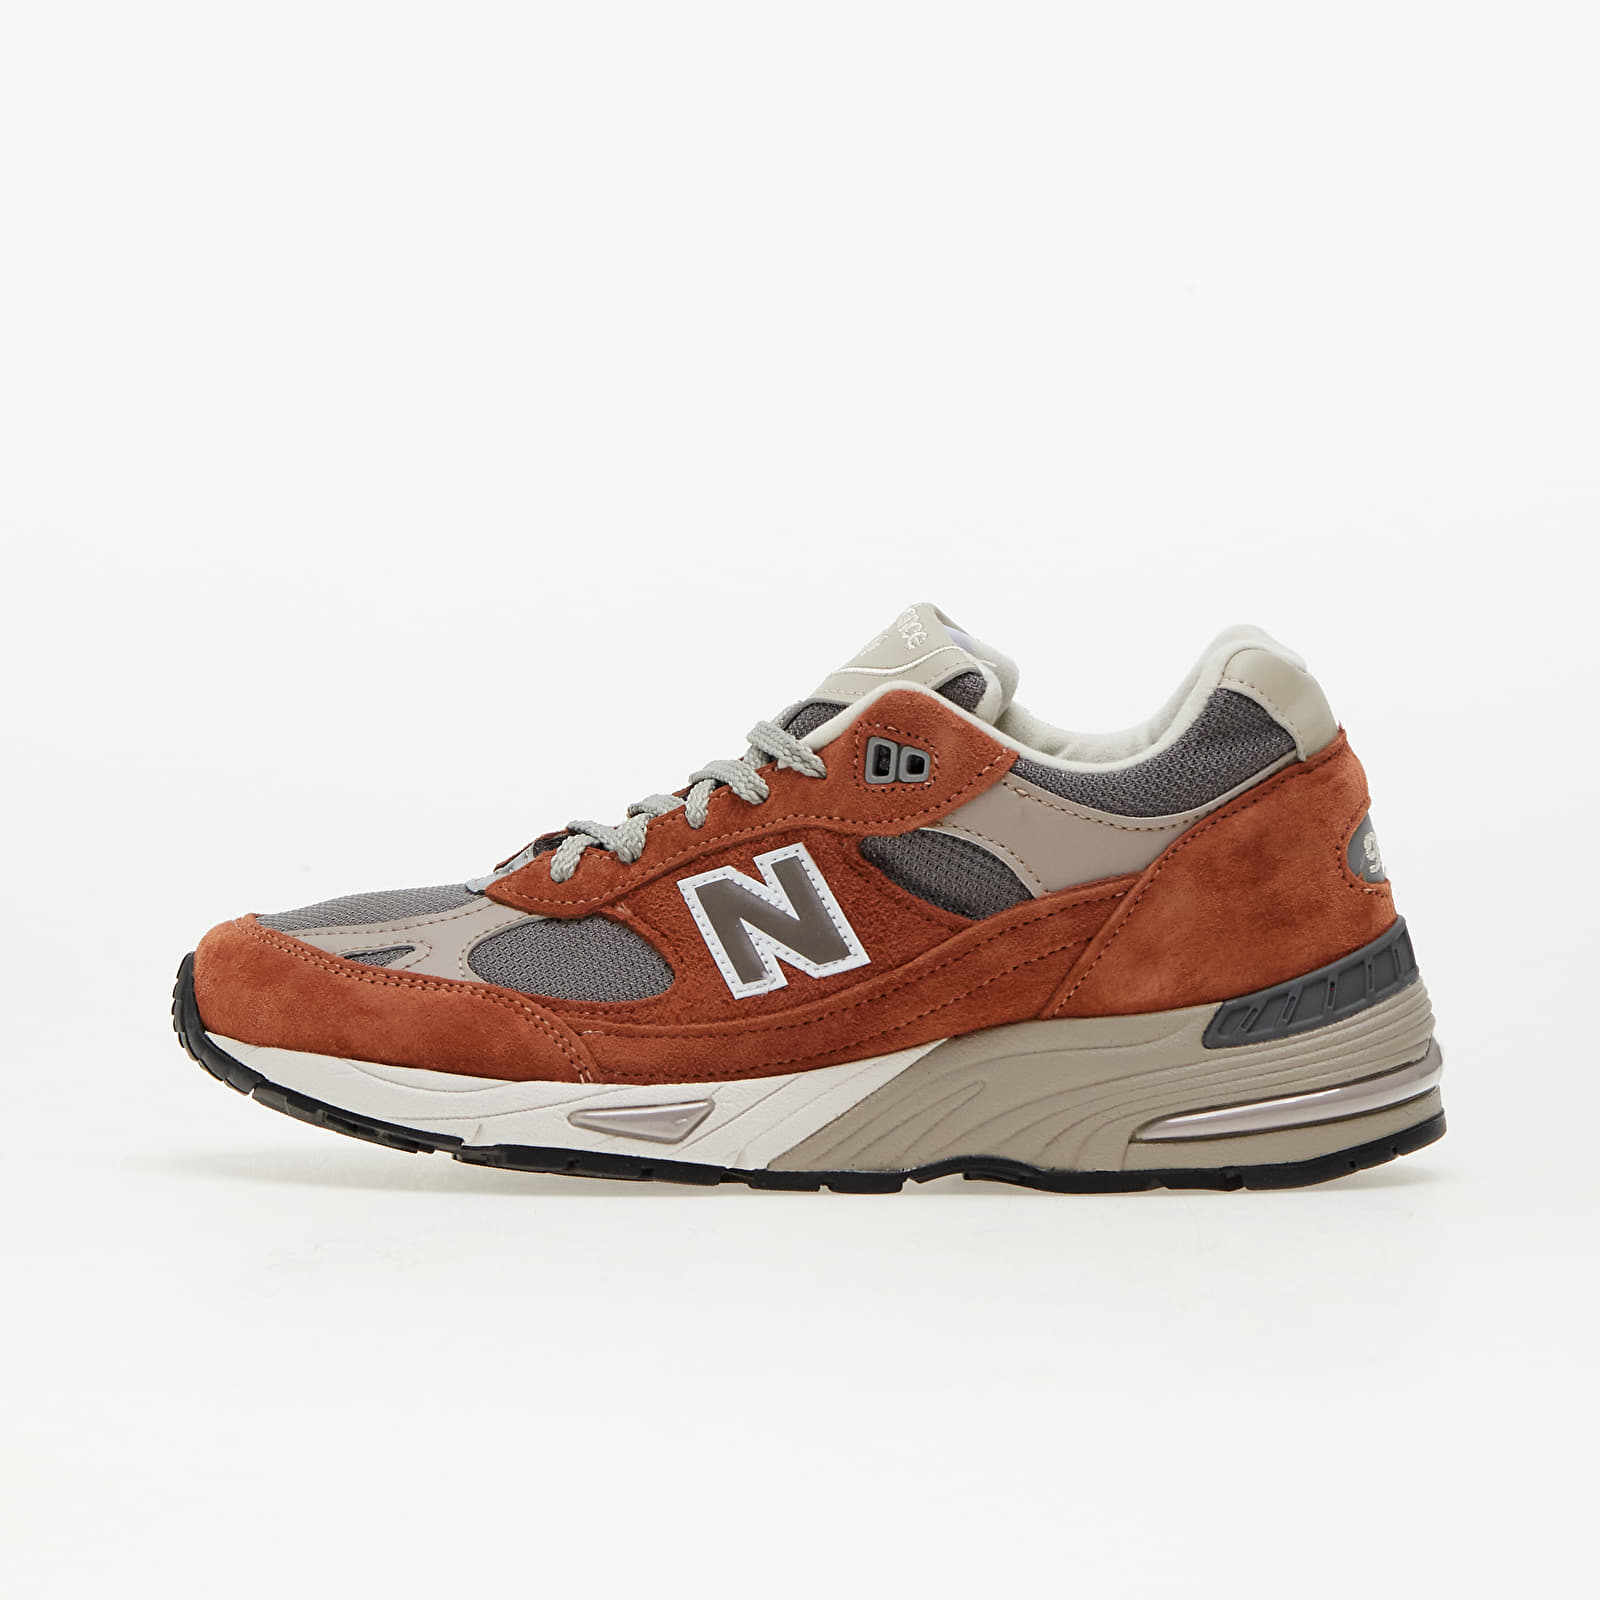 New Balance - 991 made in uk sequoia falcon